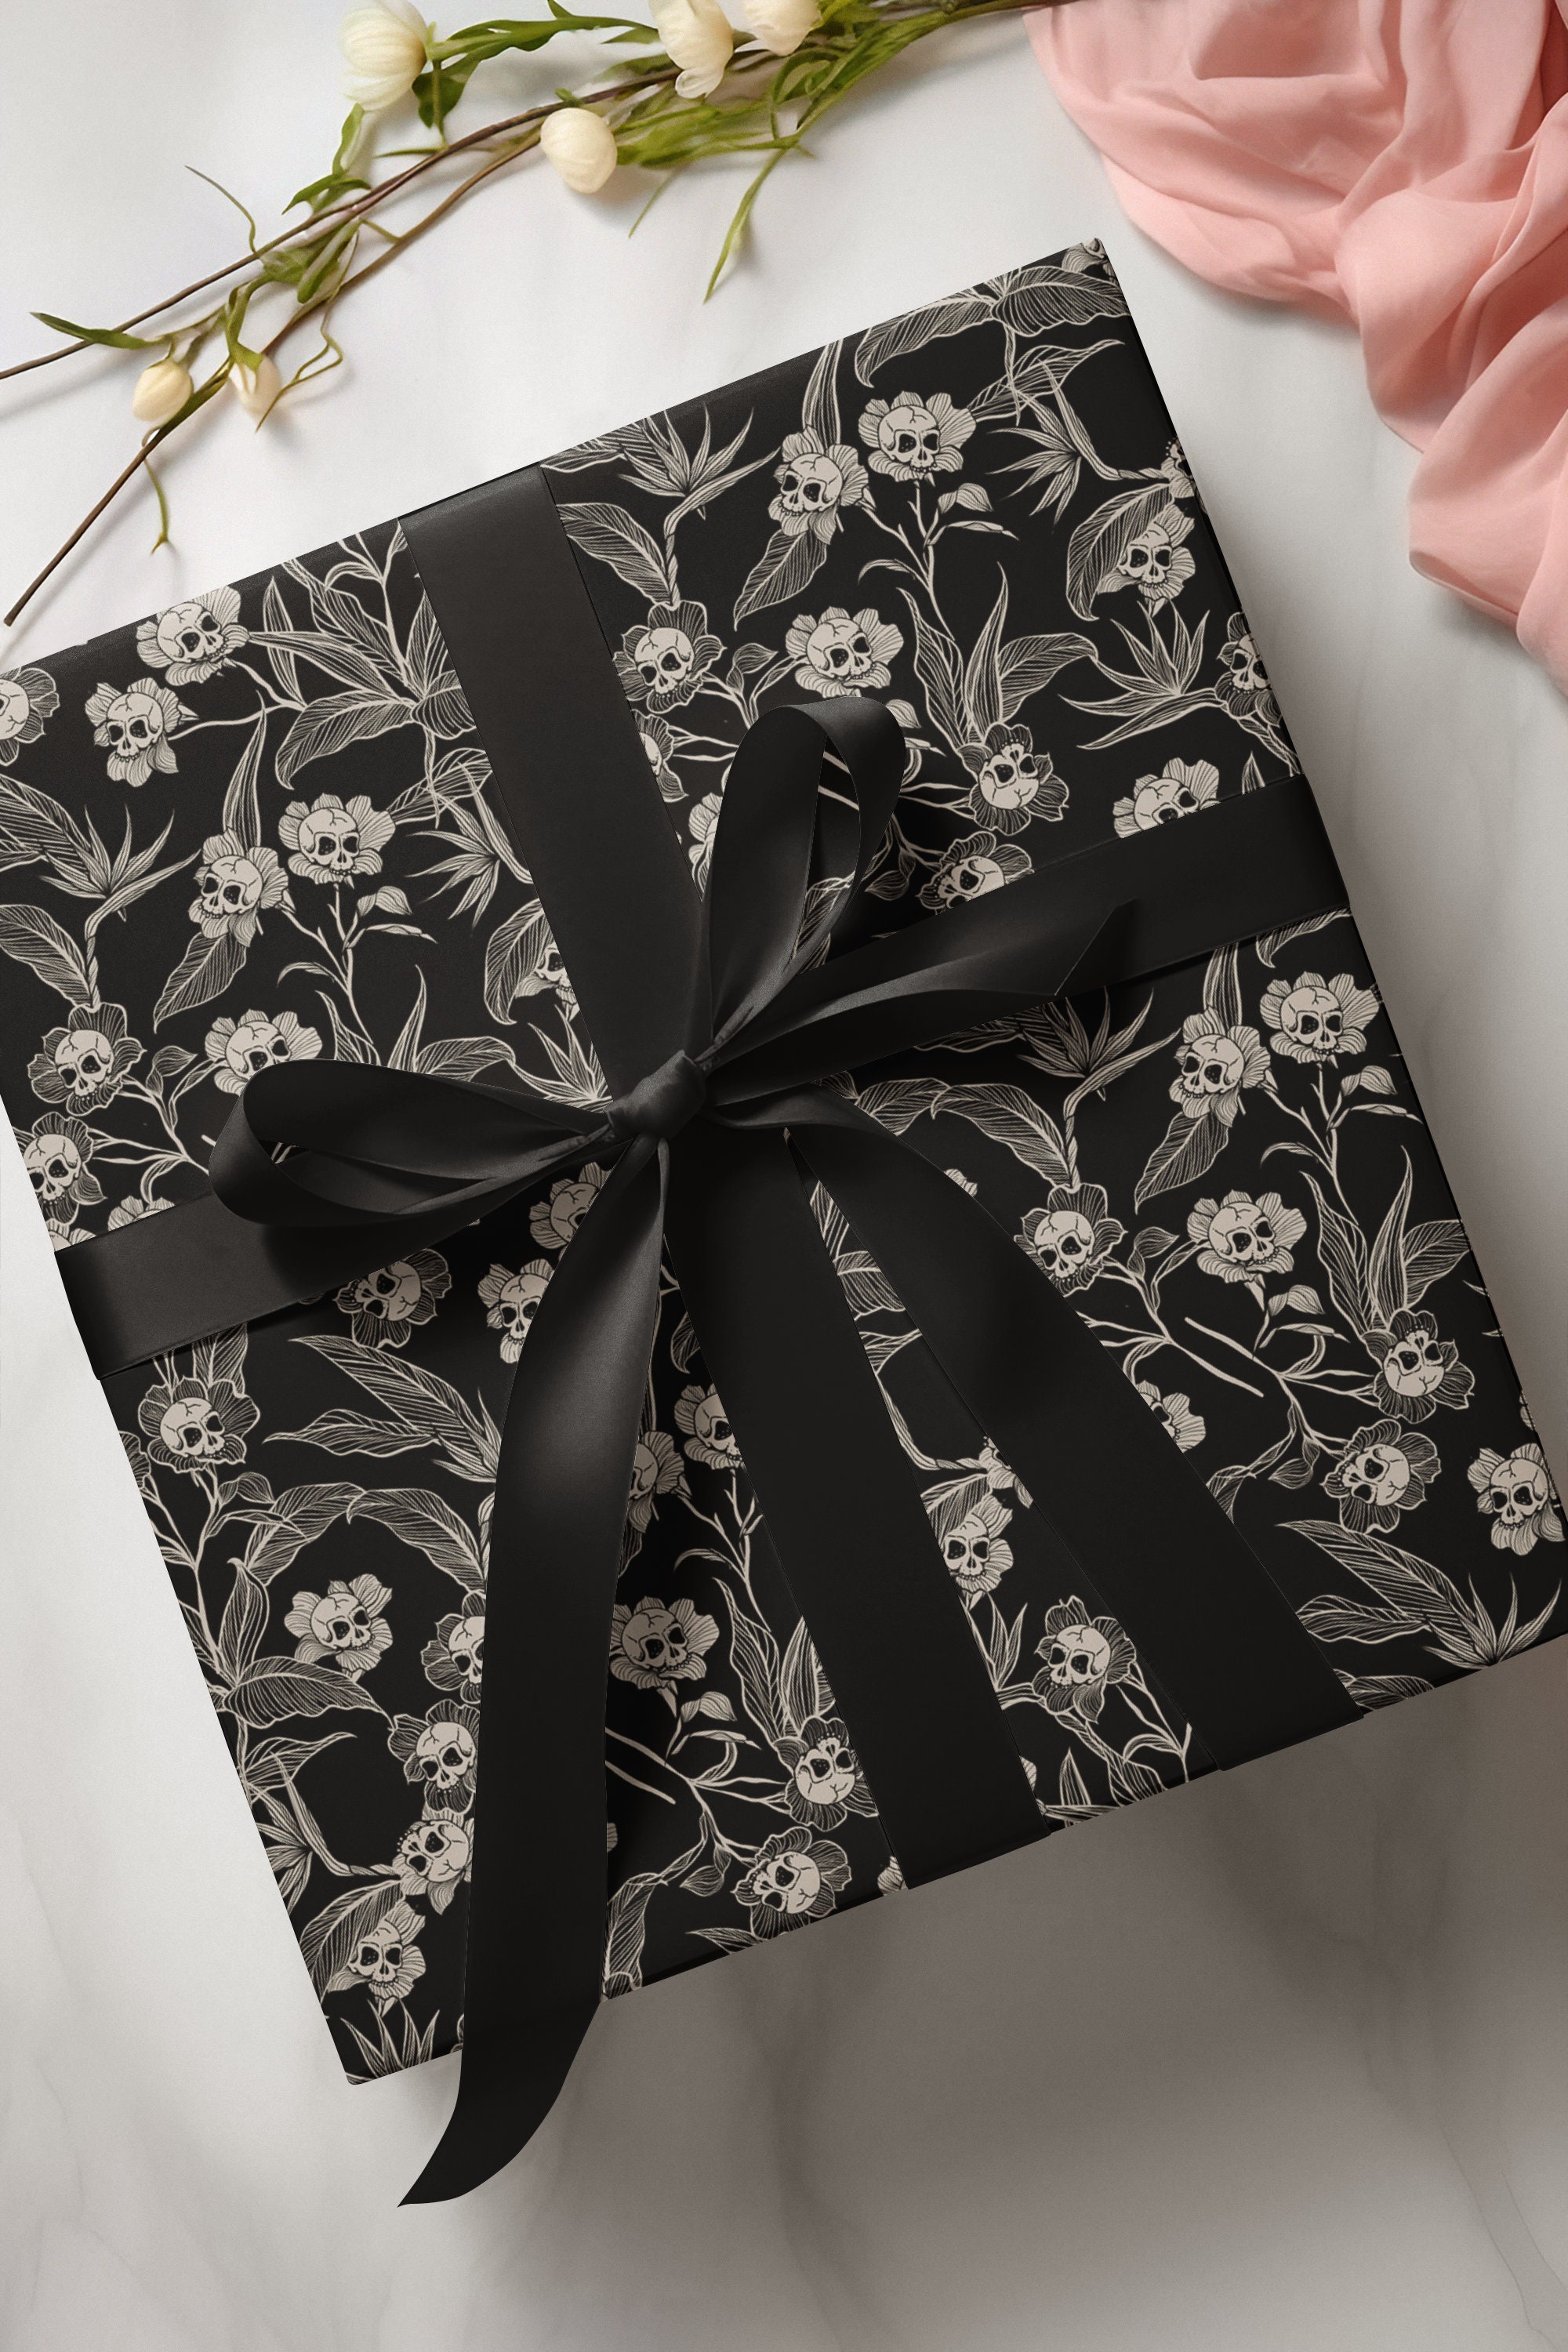 Dark Gothic Wrapping Paper, Spooky Macabre Victorian Skull Flower